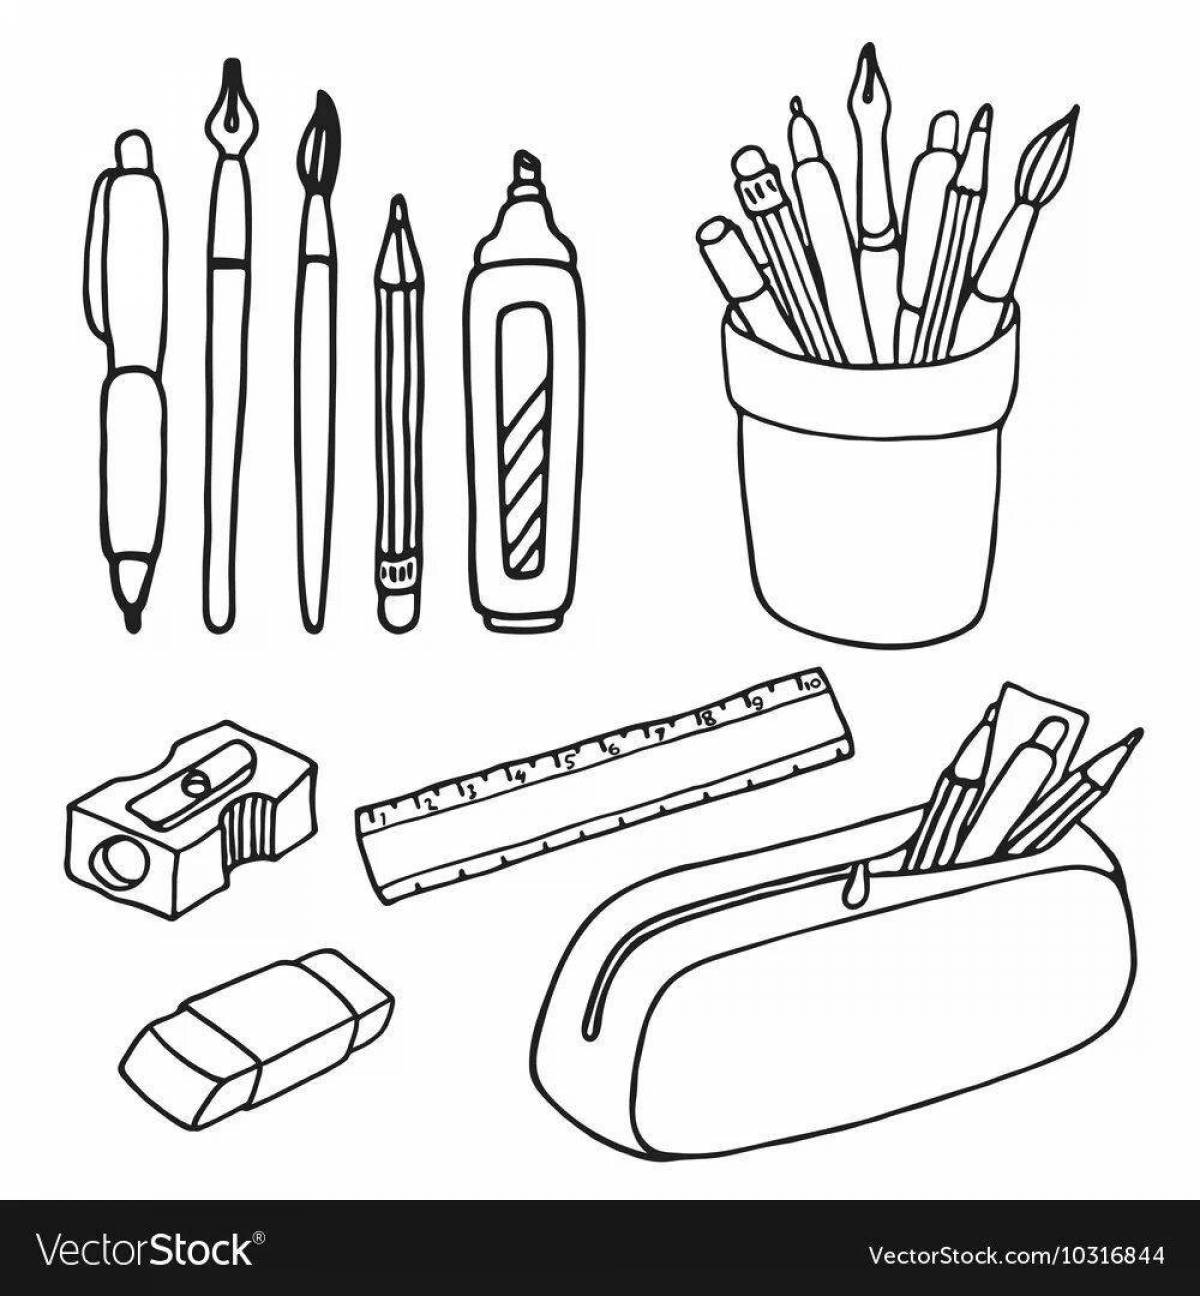 Amazing stationery coloring for girls